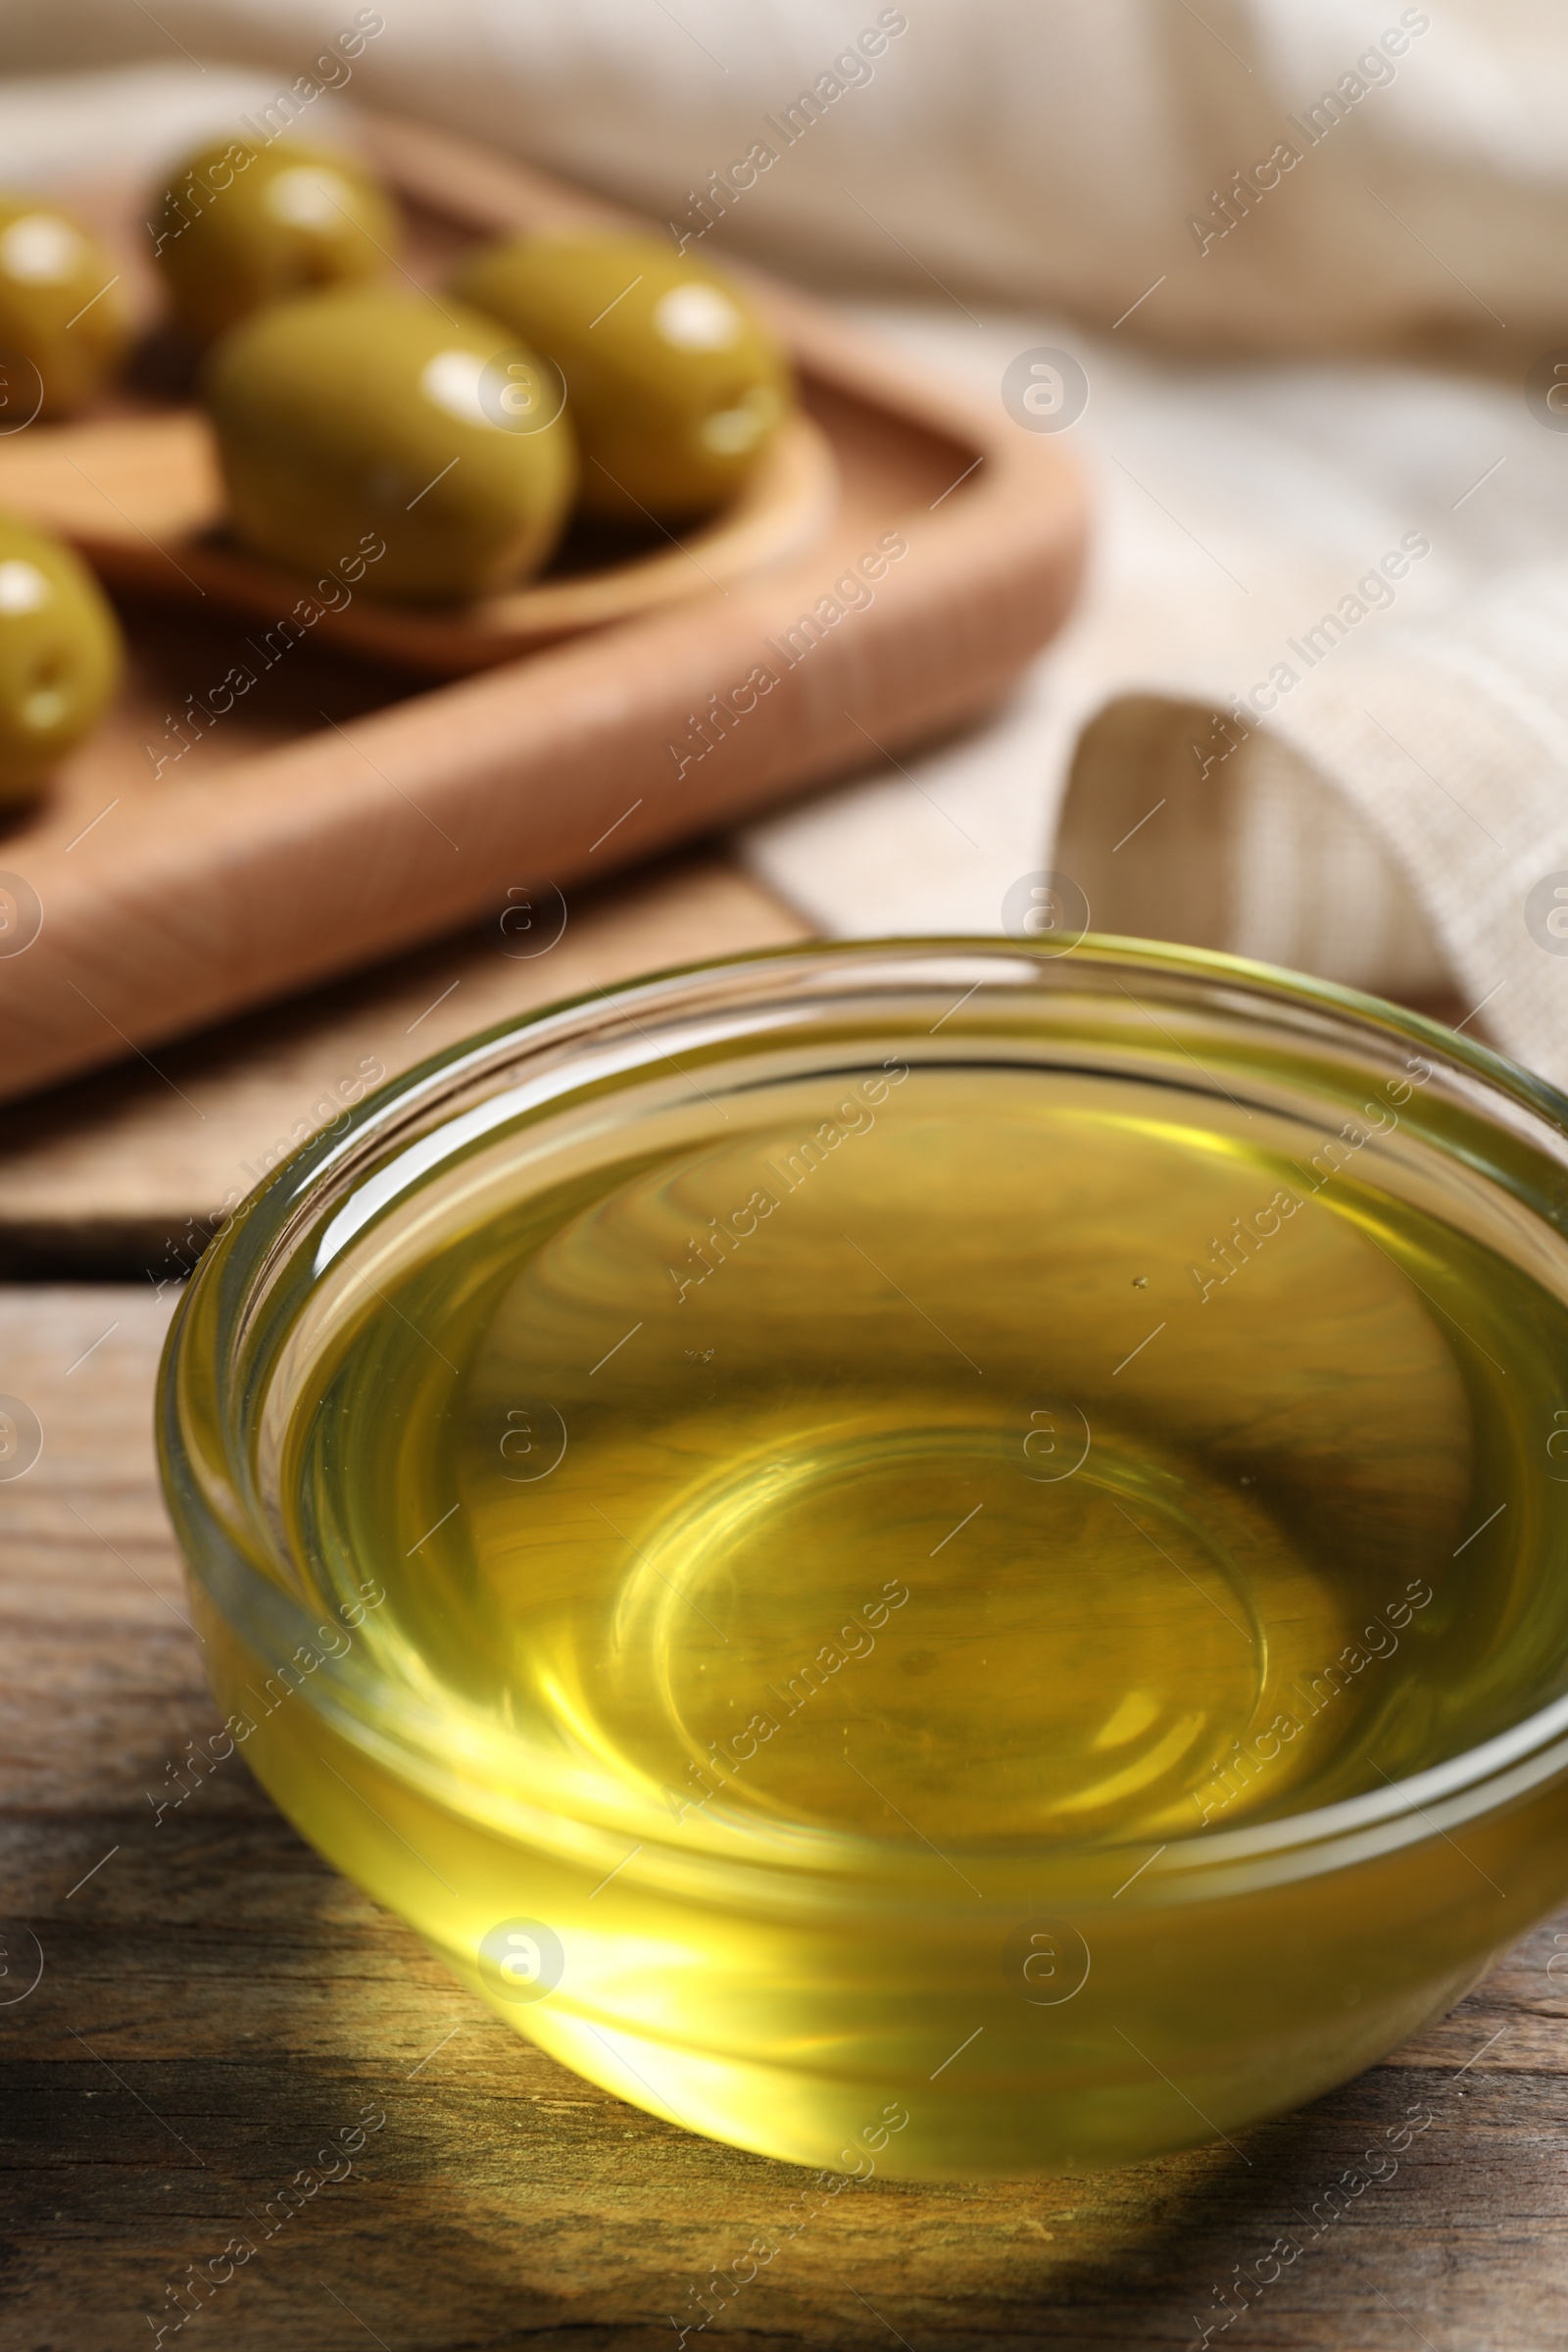 Photo of Bowl of olive oil on wooden table, closeup. Healthy cooking